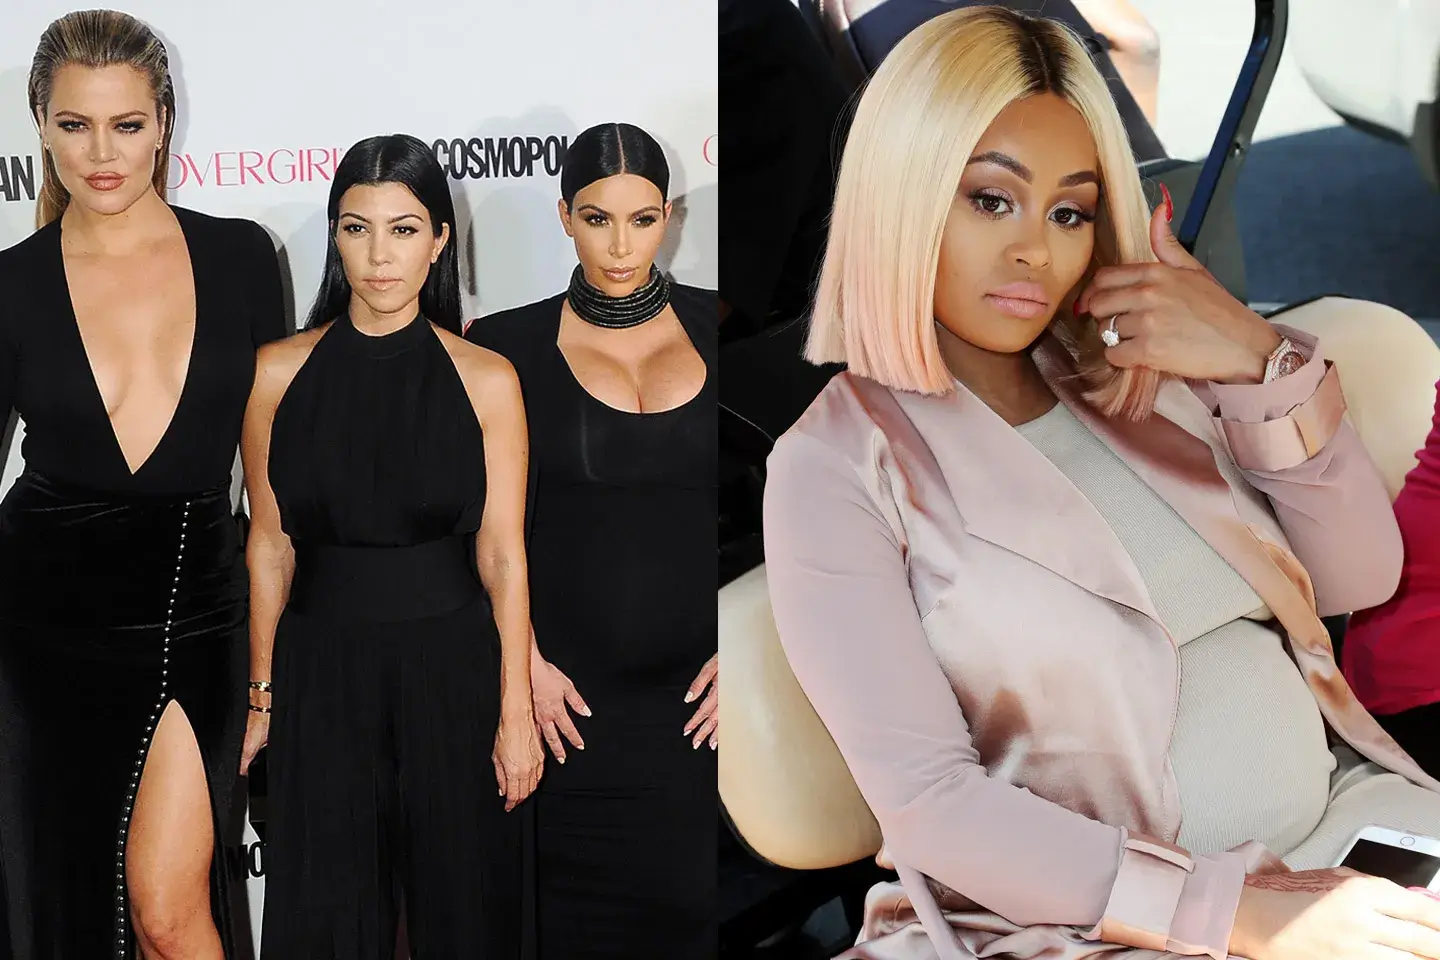 The Kardashians and Blac Chyna - Blac Chyna Almost Kicks Instagram Model Alysia Magen's Teeth in For Humiliating Her